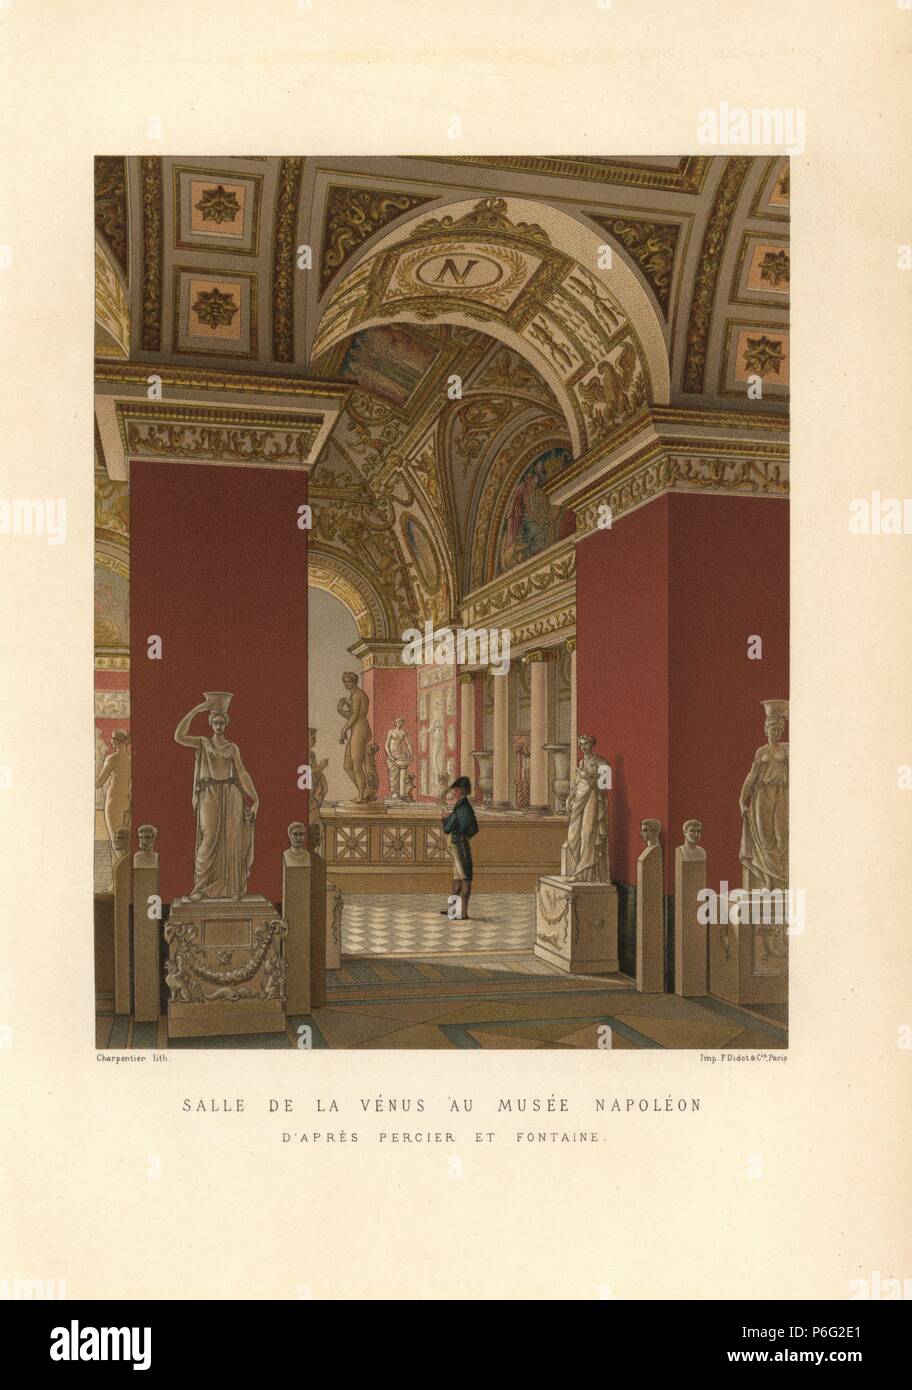 The room of Venus in the Musee Napoleon (now the Louvre), 1810. Room and corridors under arched ceilings with Napoleon's 'N' mark, crowded with classical Greek and Roman statues. Drawn by Percier and Fontaine, lithograph by Charpentier. Chromolithograph from Paul Lacroix's 'Directoire, Consulat et Empire,' Paris, 1884. Stock Photo